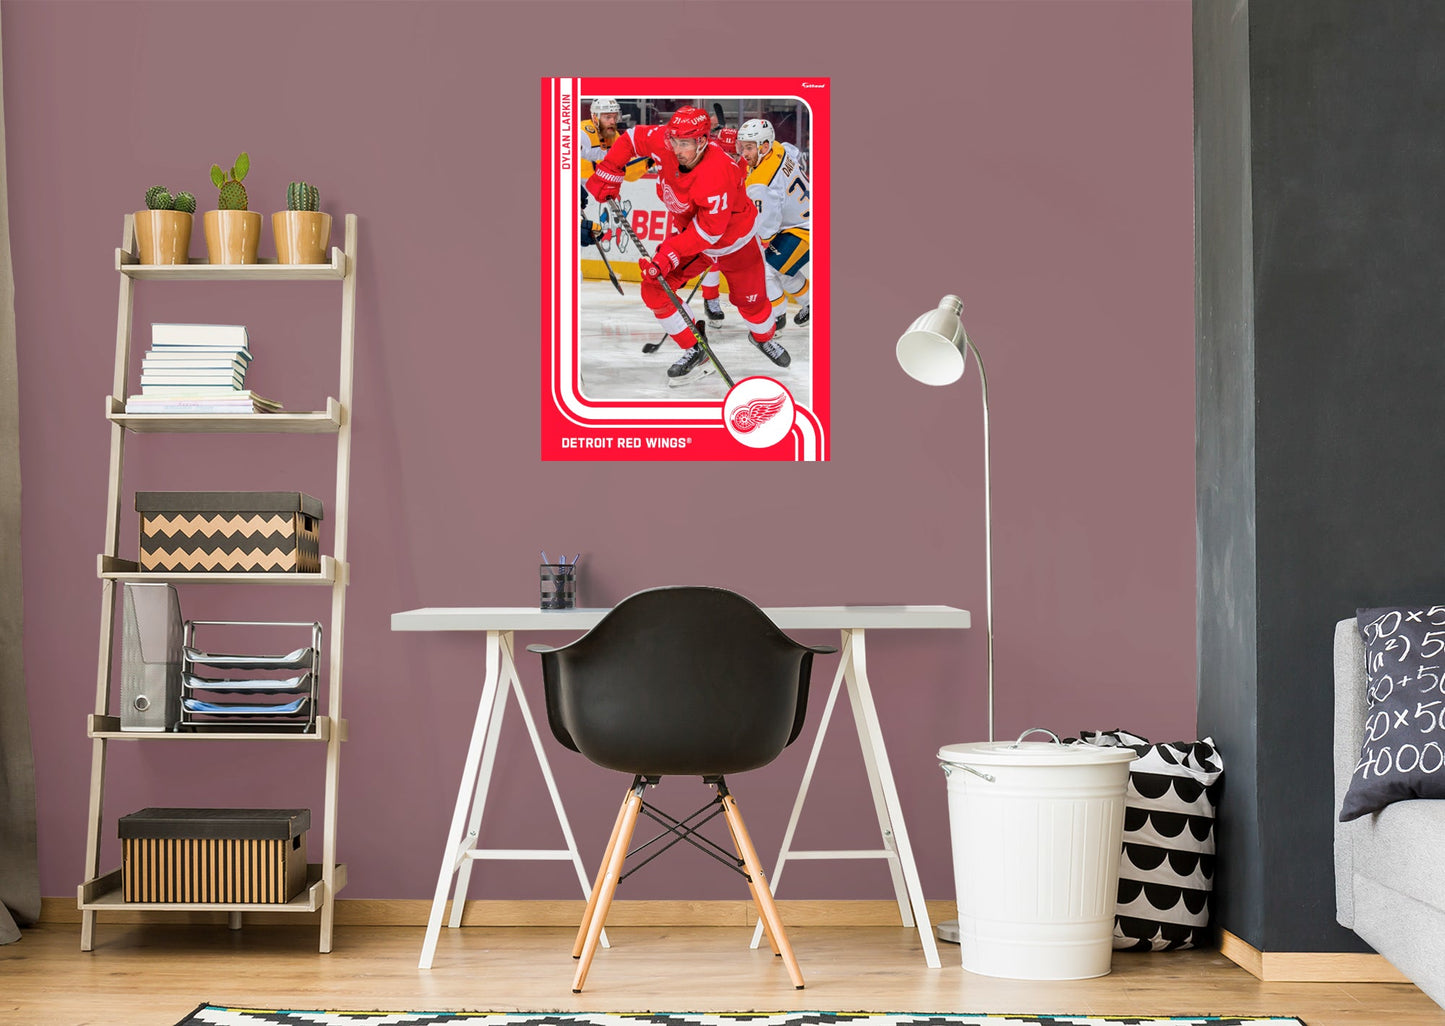 Detroit Red Wings: Dylan Larkin Poster - Officially Licensed NHL Removable Adhesive Decal